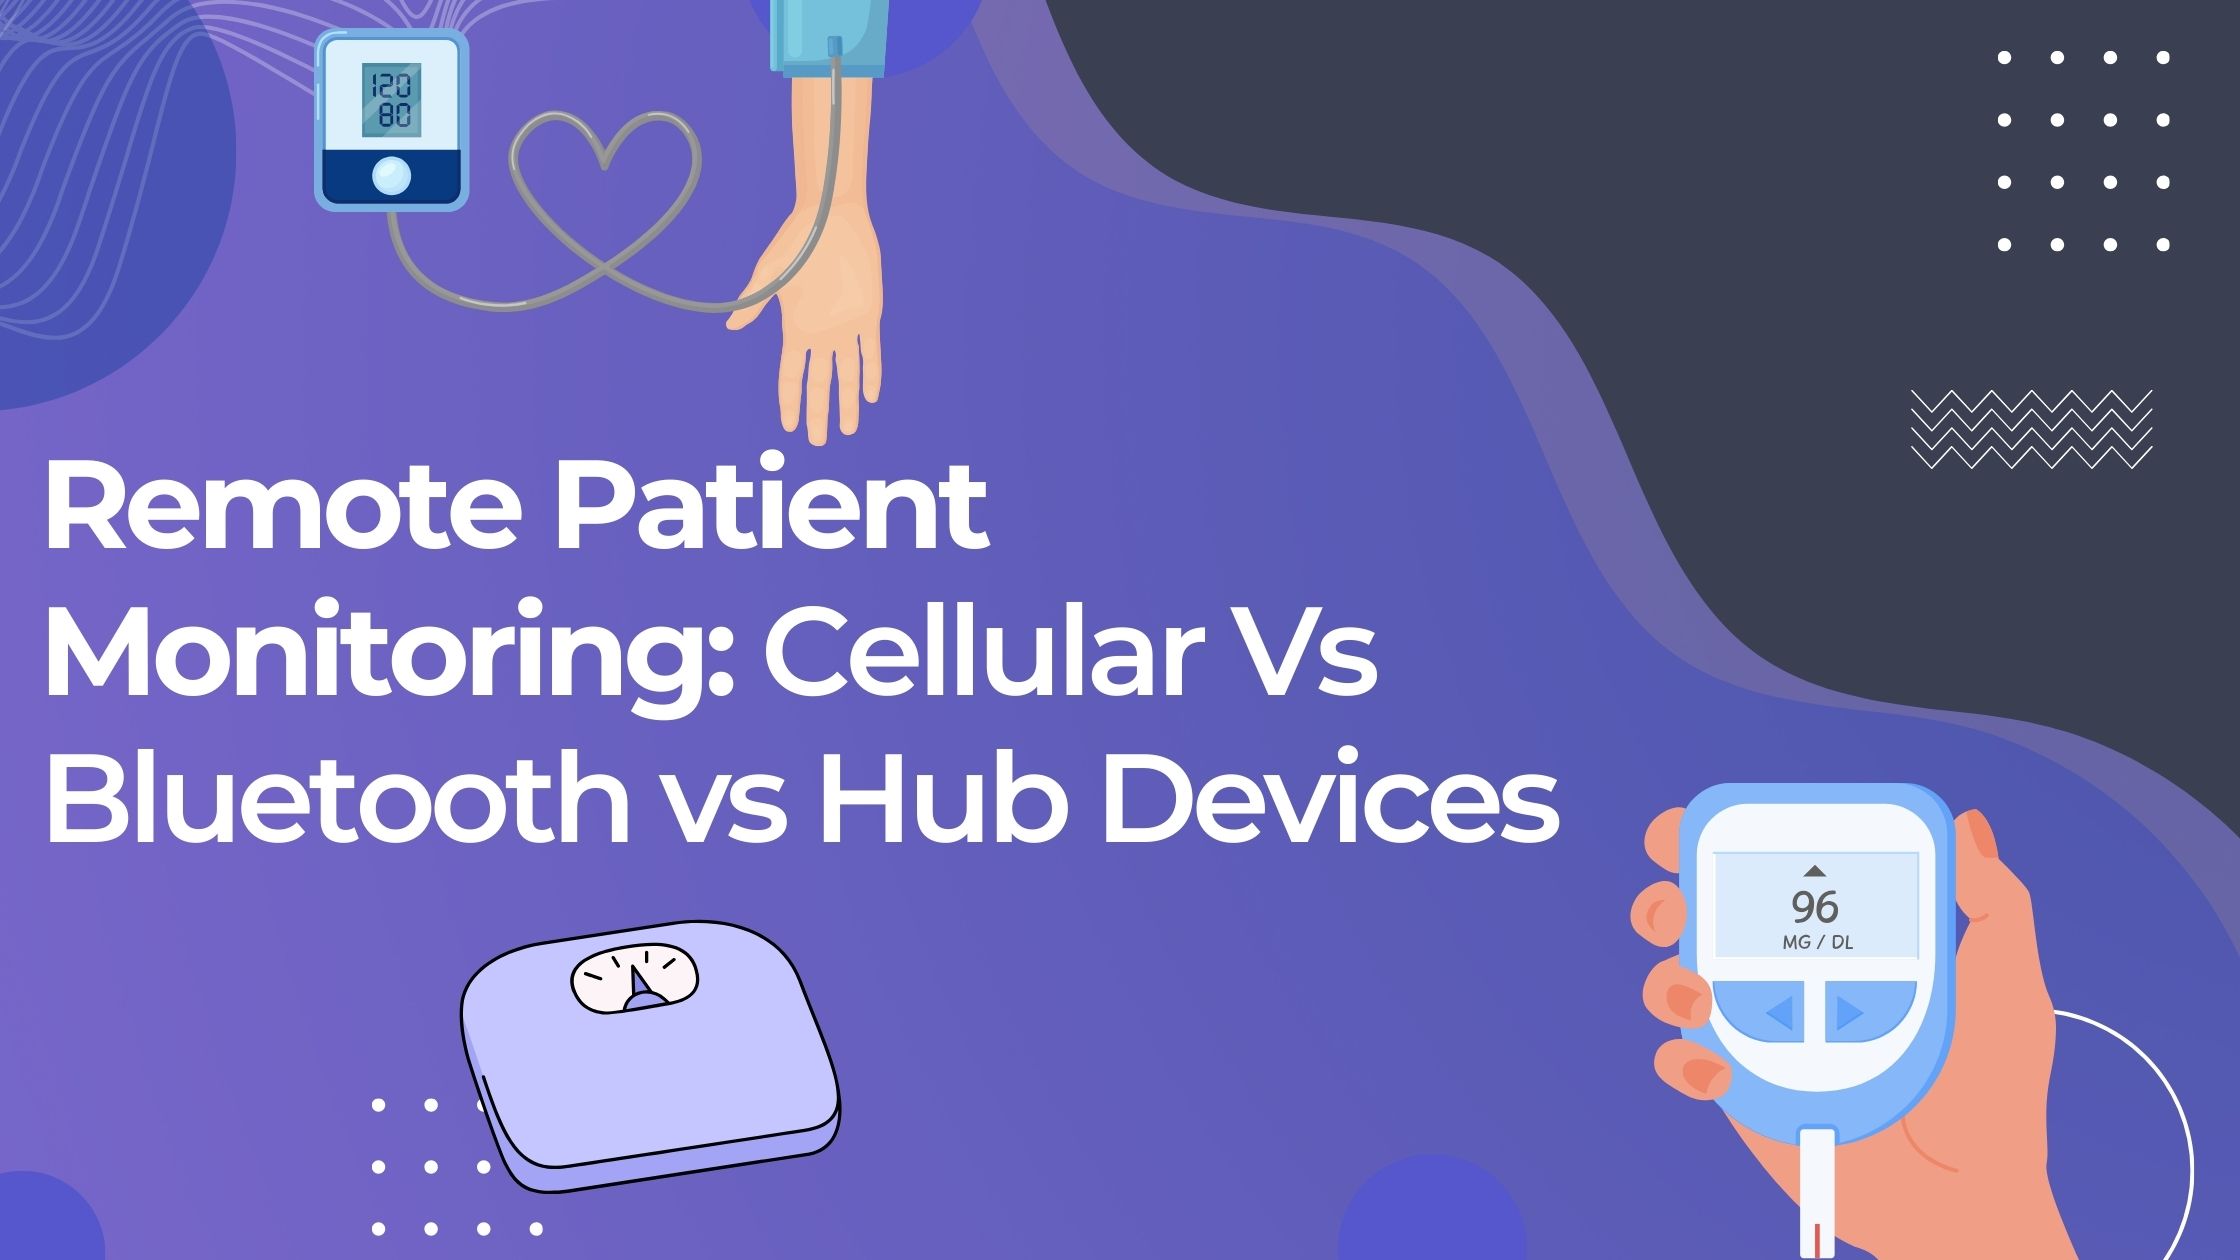 Remote Patient Monitoring: Cellular Vs Bluetooth vs Hub Devices